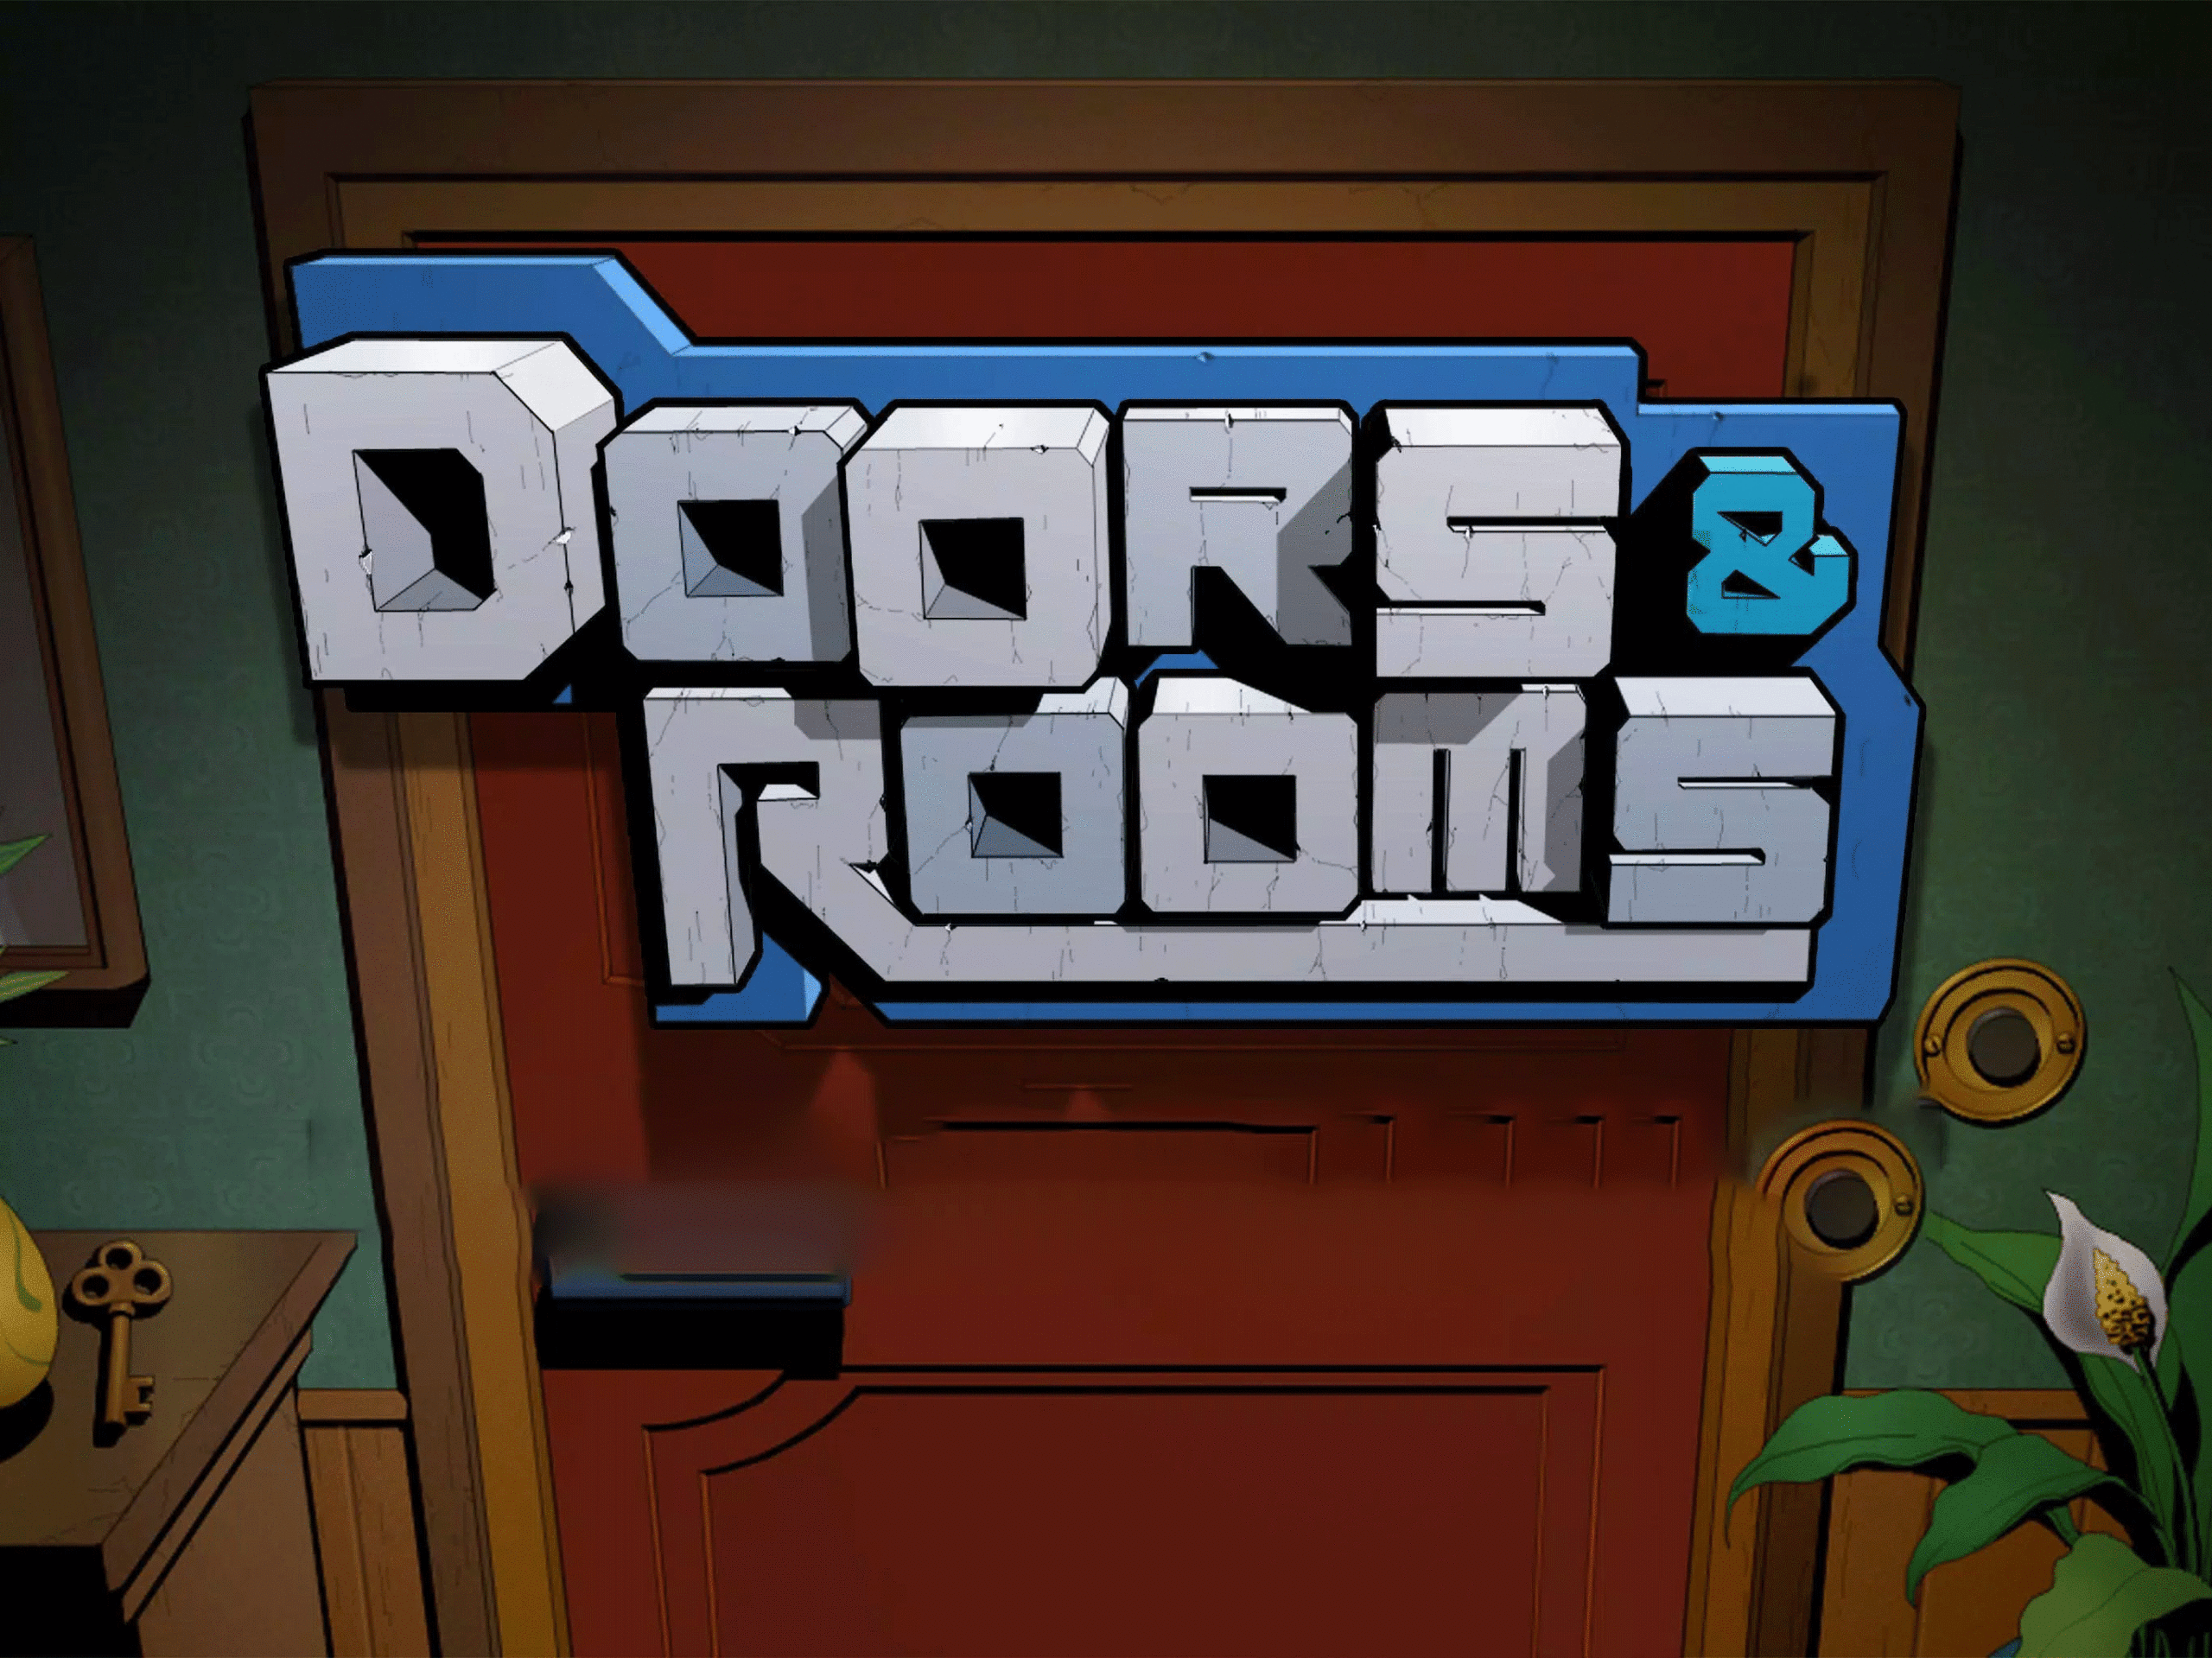 Doors&Rooms : Escape King 1.2.0 (Unlimited Coins)